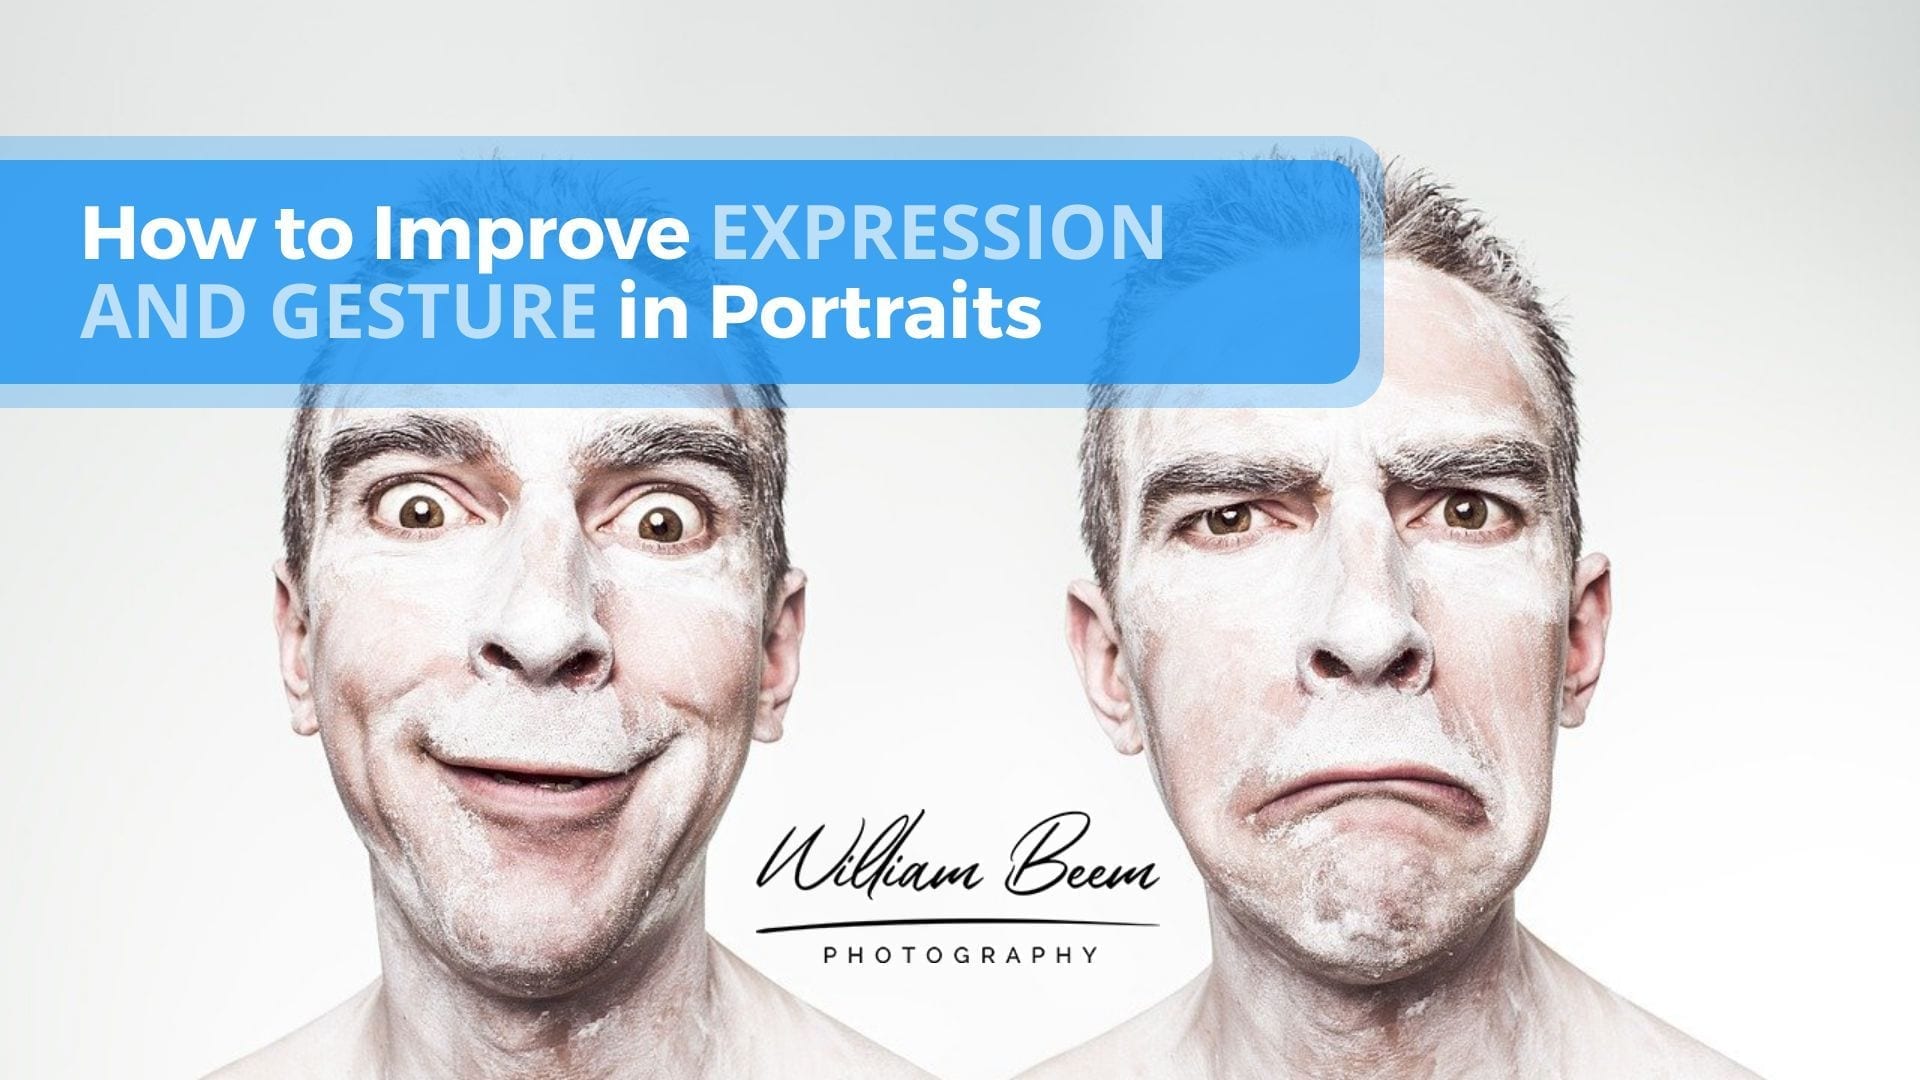 How to Improve Expression and Gesture in Portraits